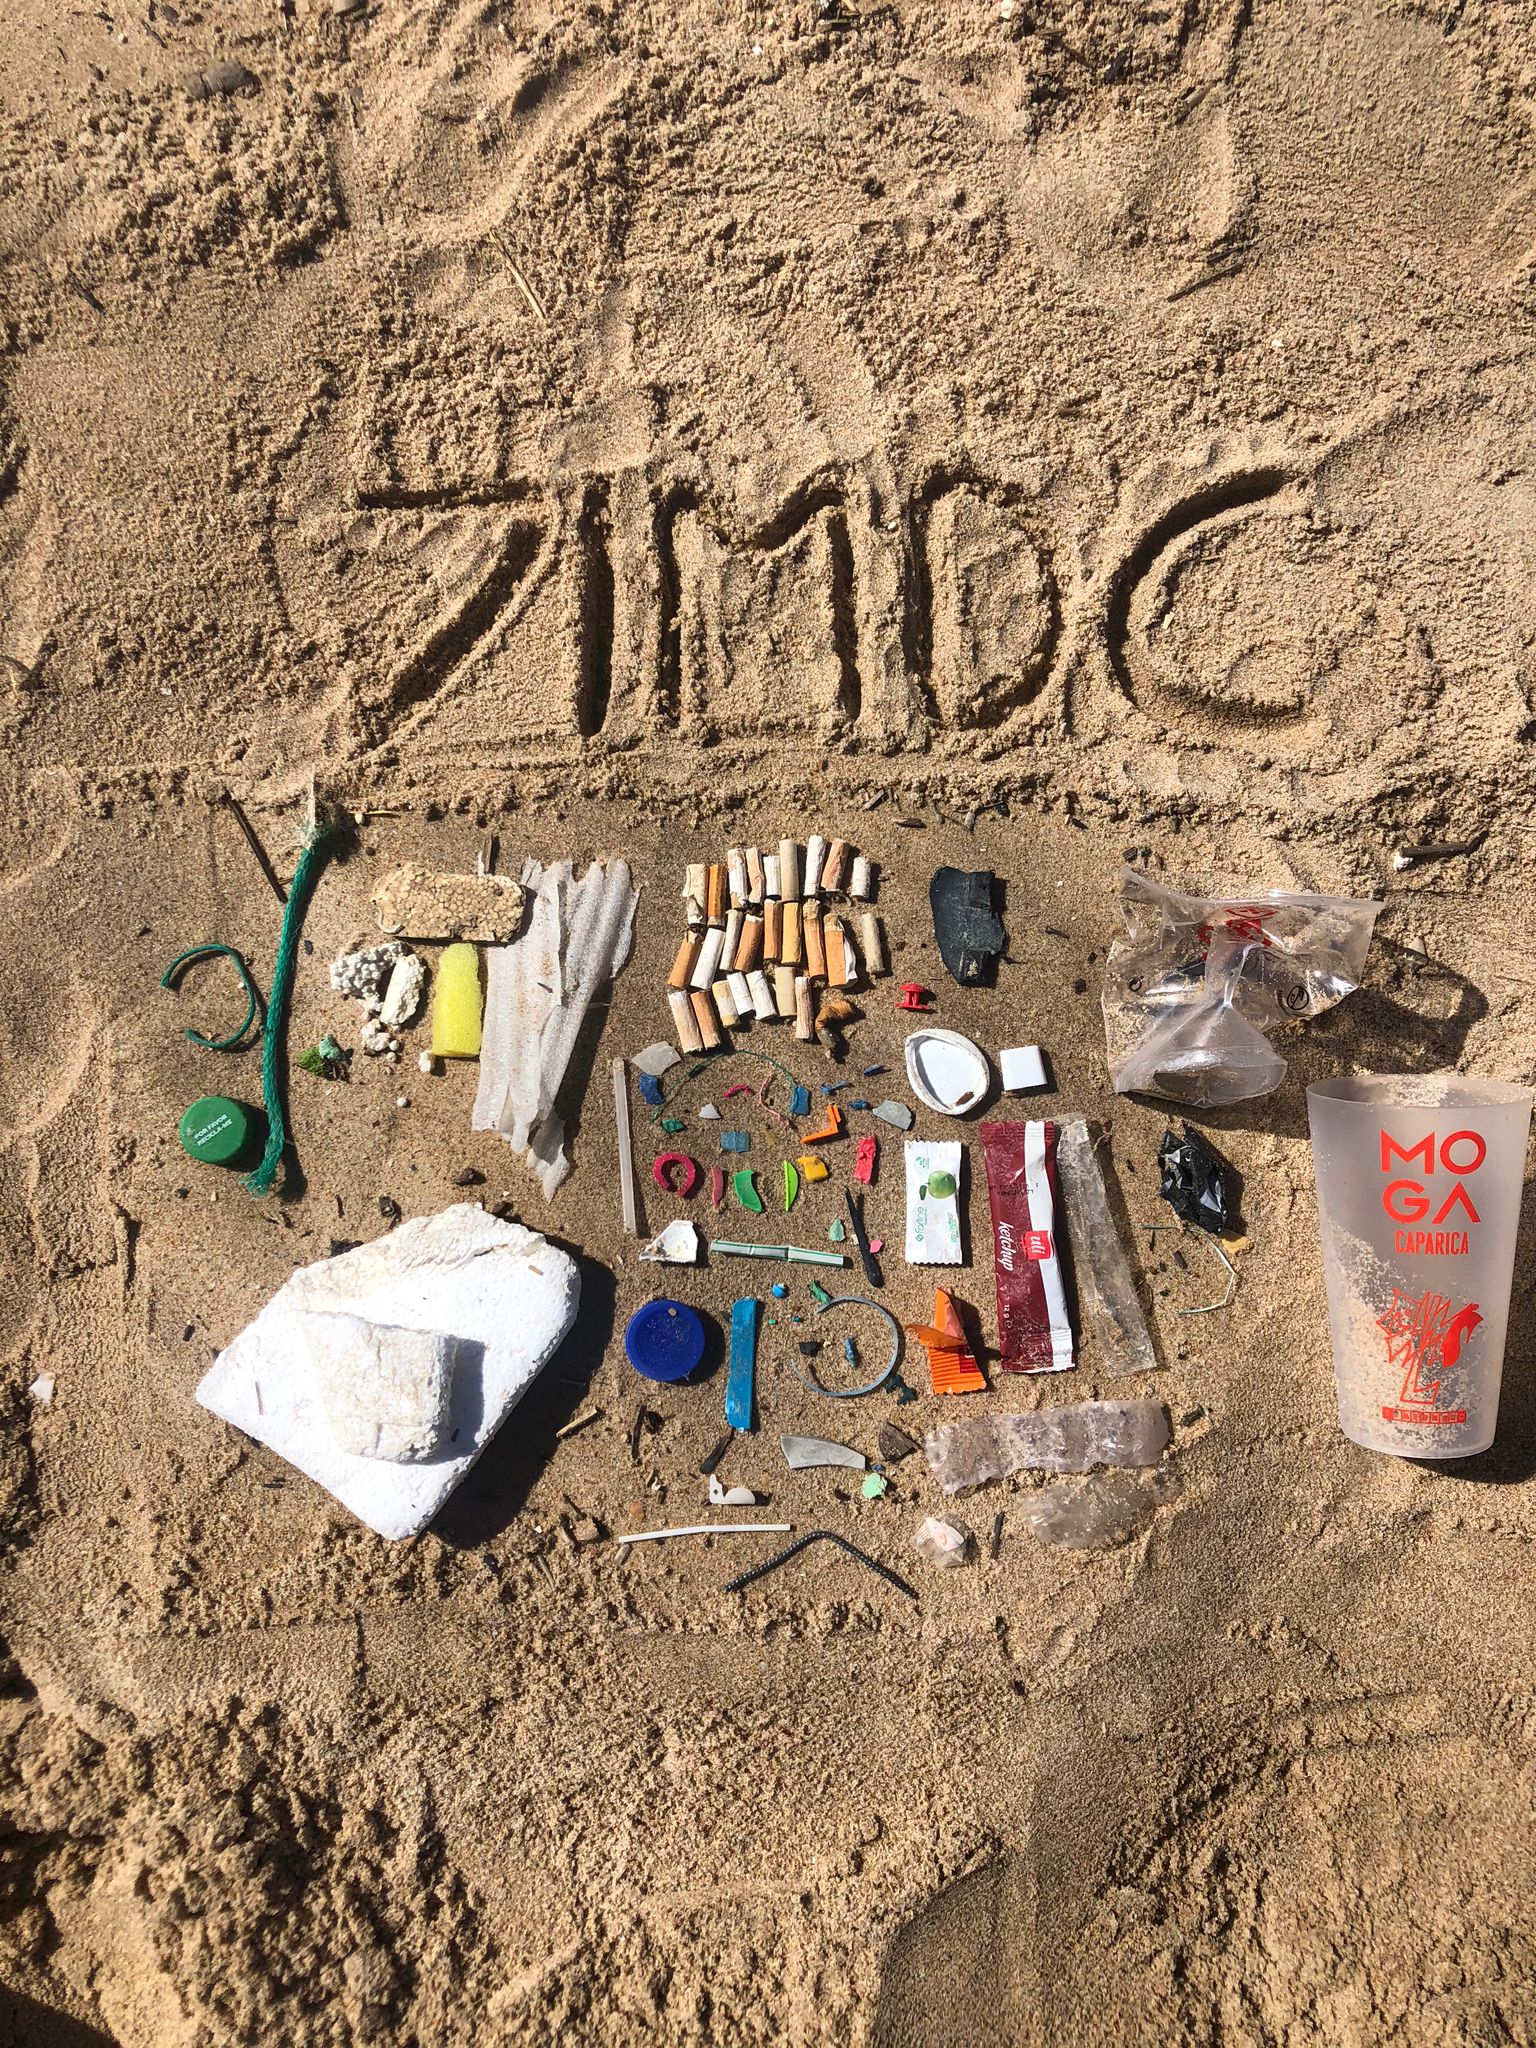 Participation at the 7th International Marine Debris Conference (7IMDC)